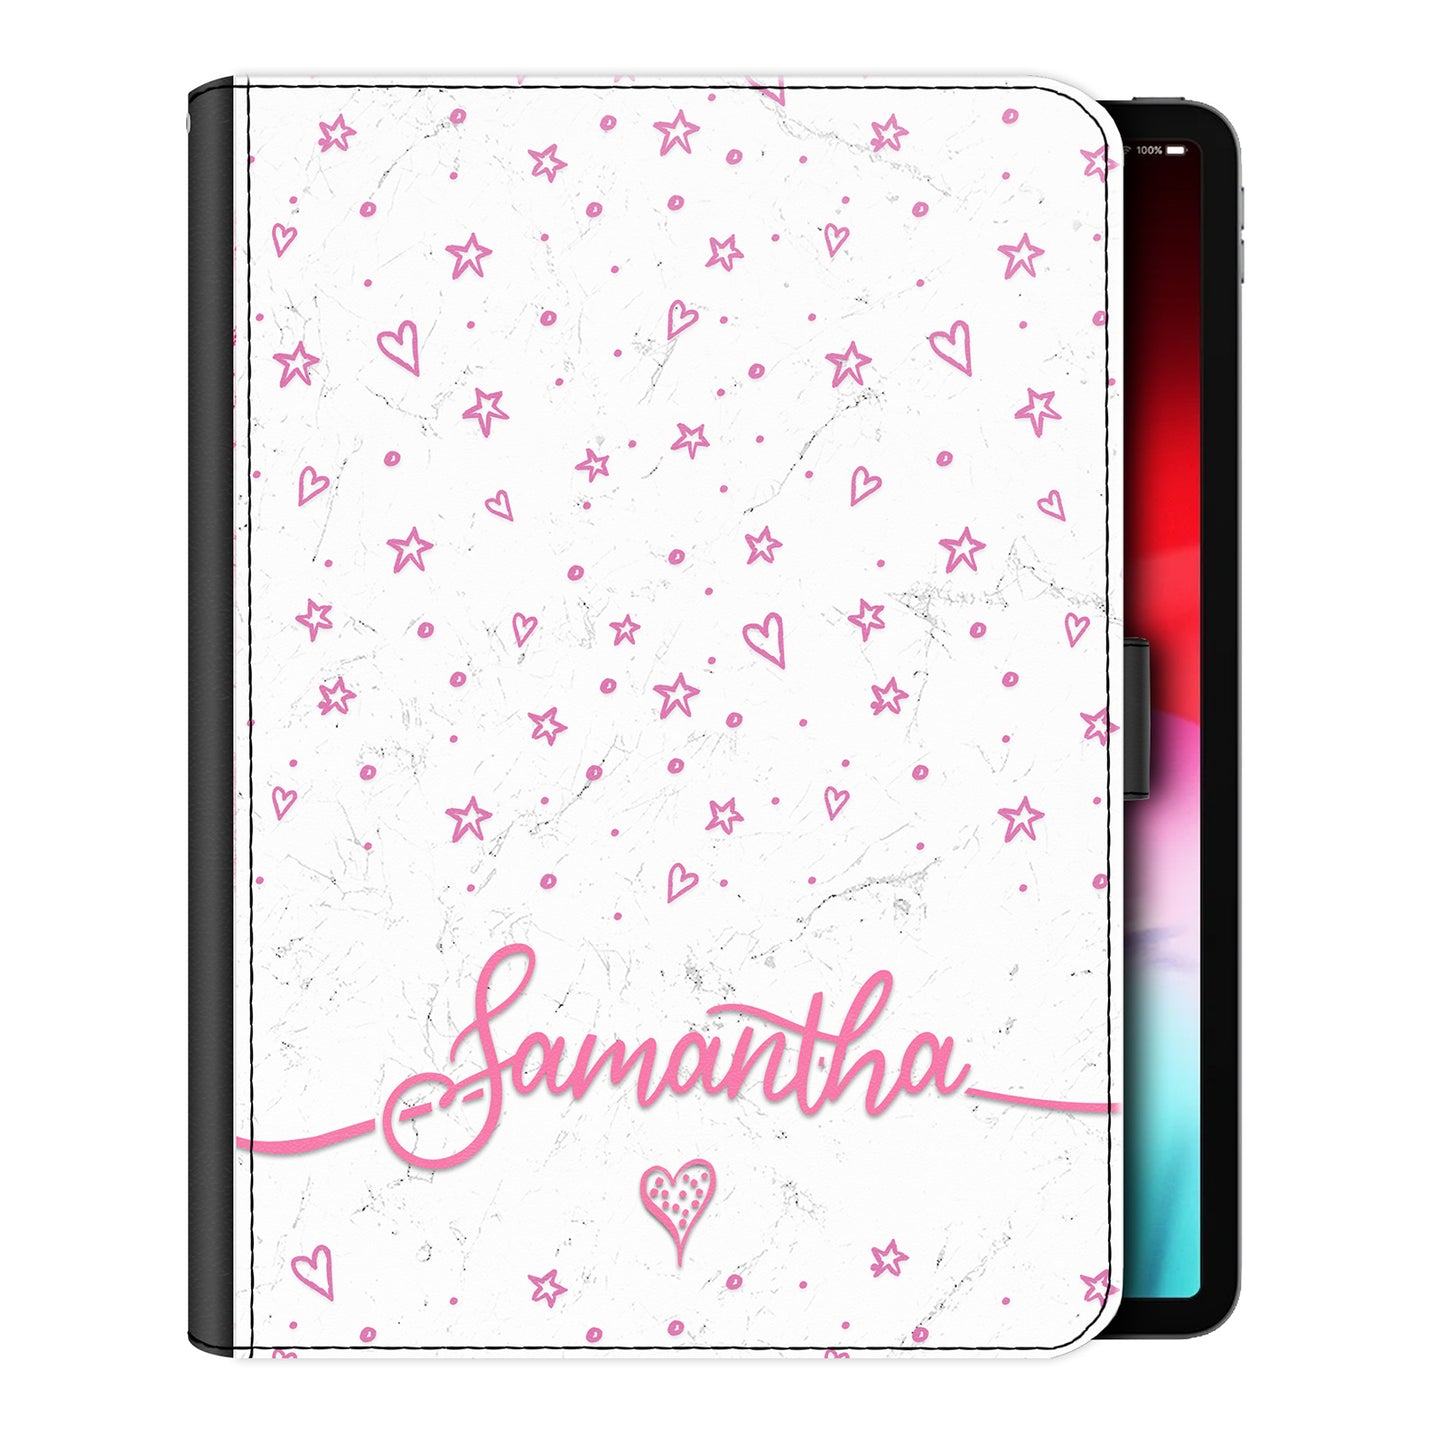 Personalised iPad Case with Pink Stars Hearts and Name on White Marble